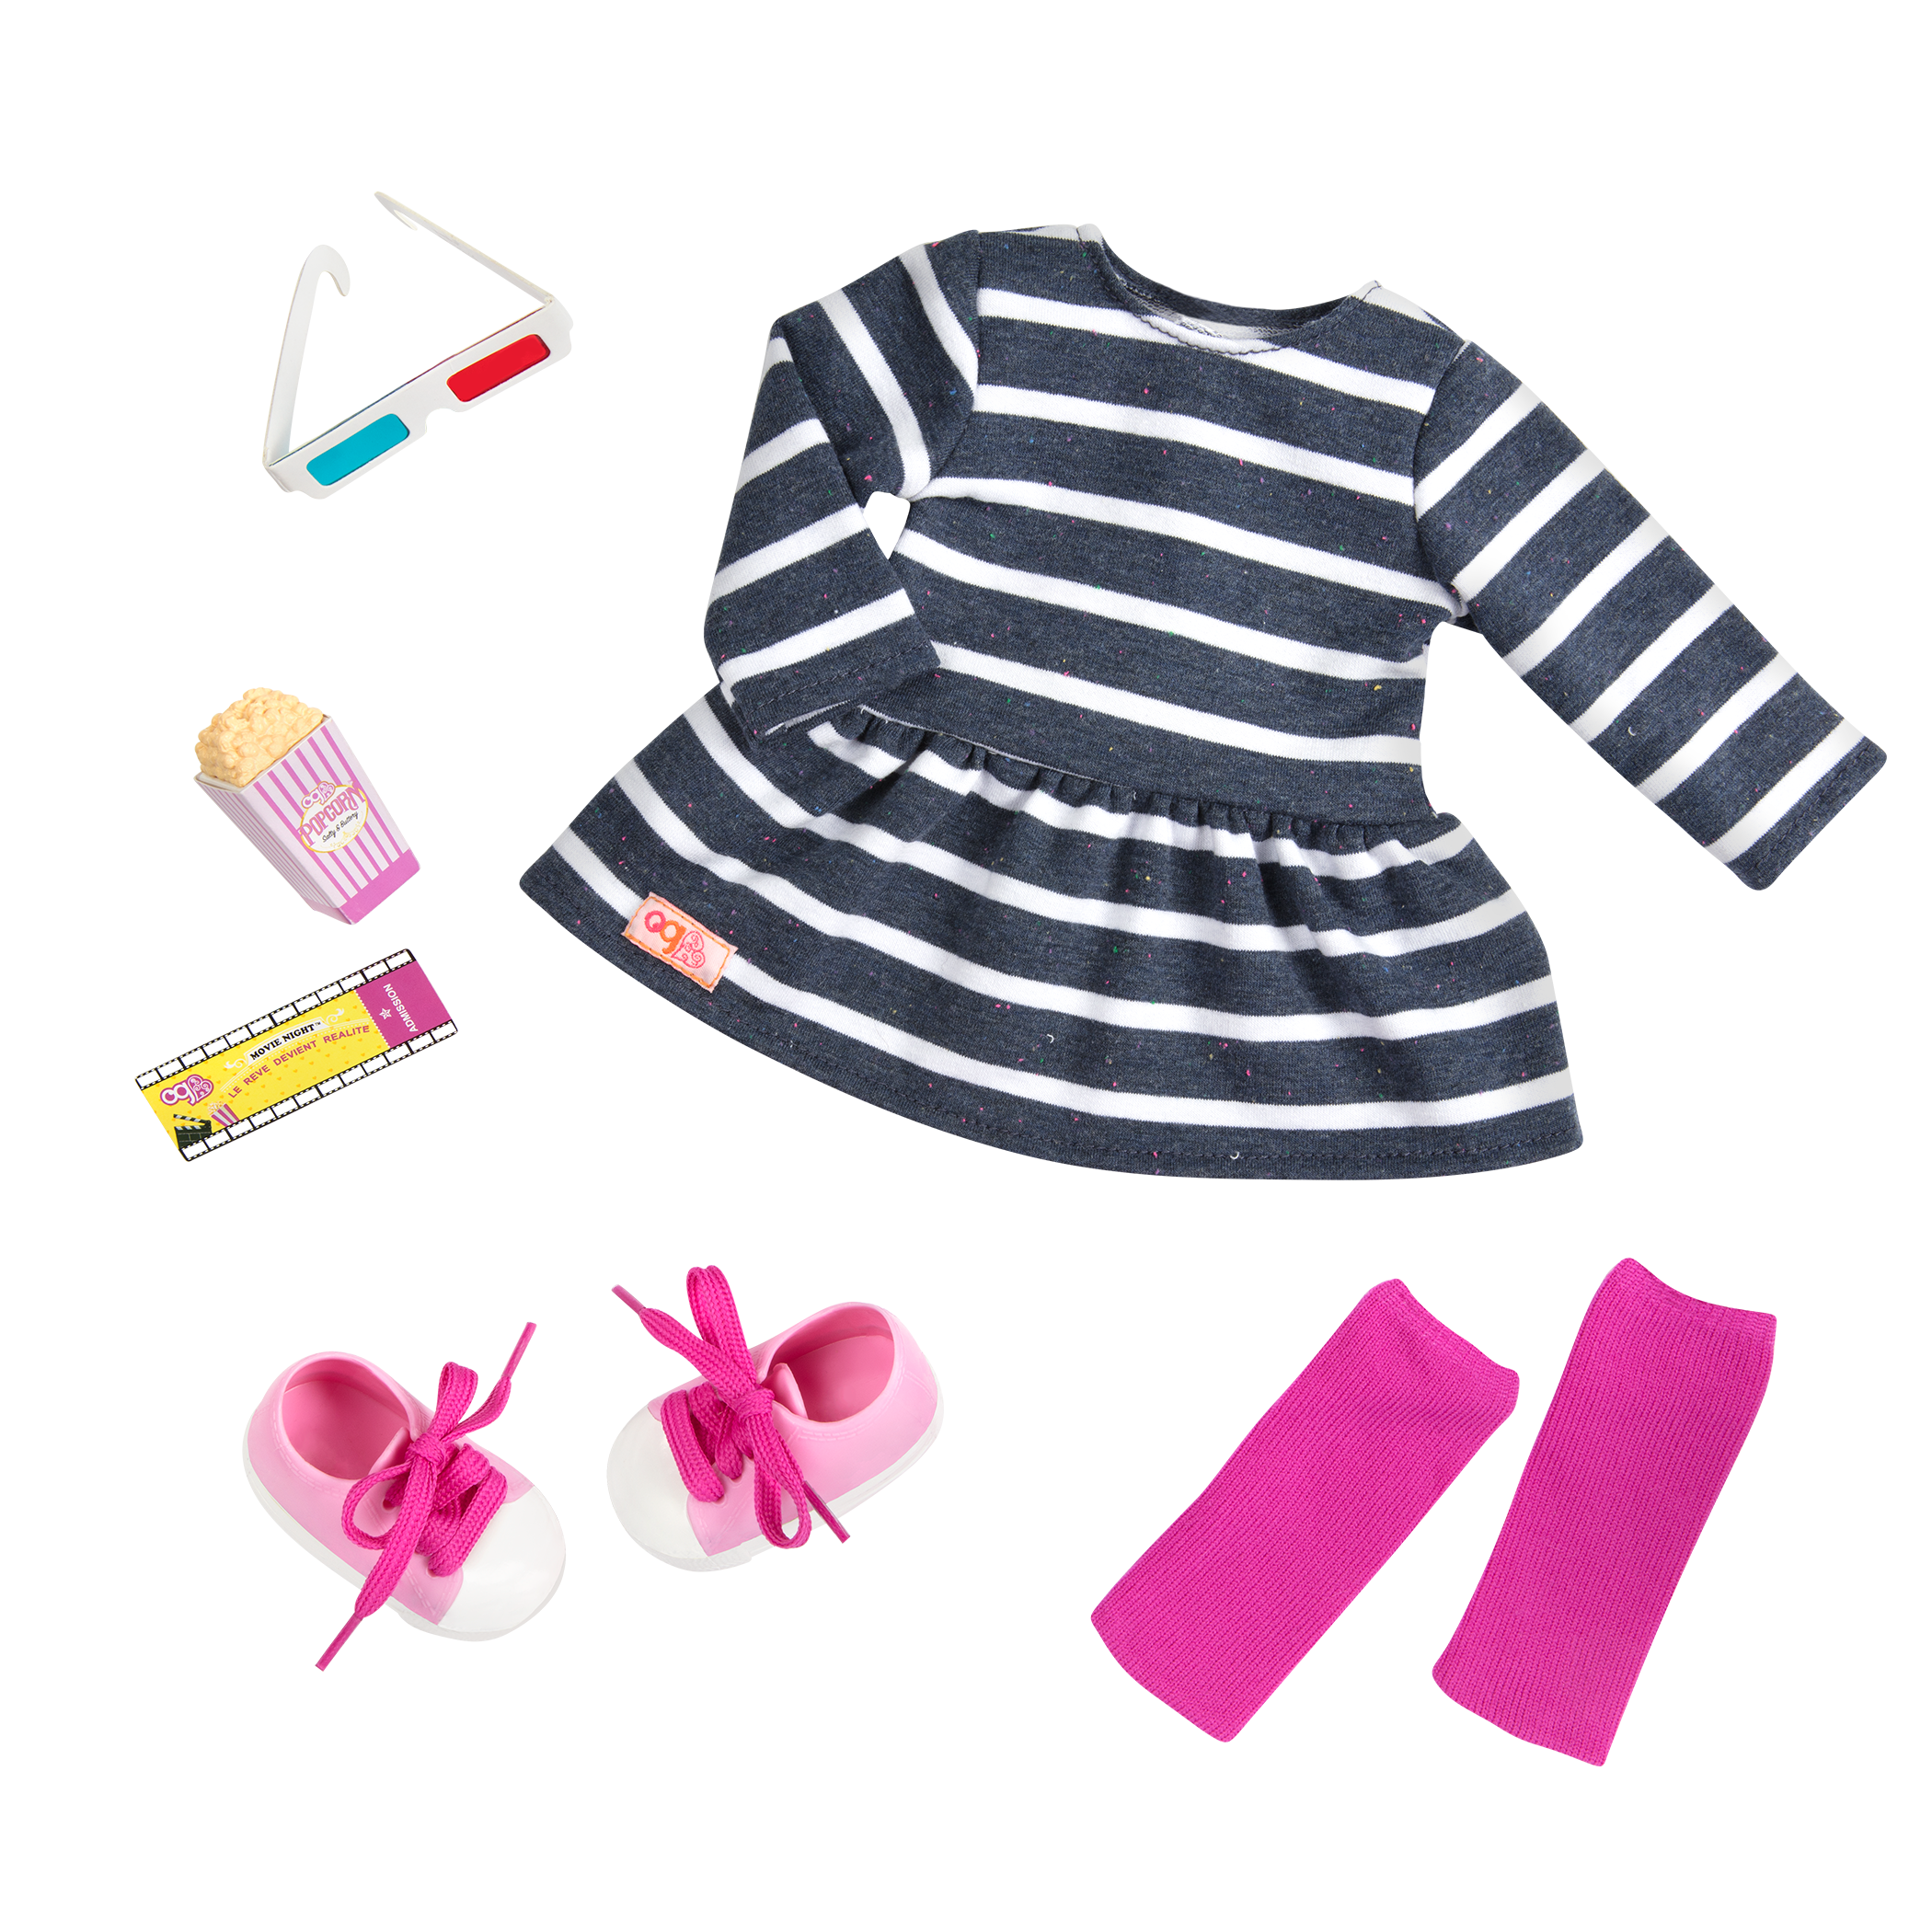 Silently convenience Overlap Doll Clothing: Buy 18 Inch Doll Clothes | Our Generation